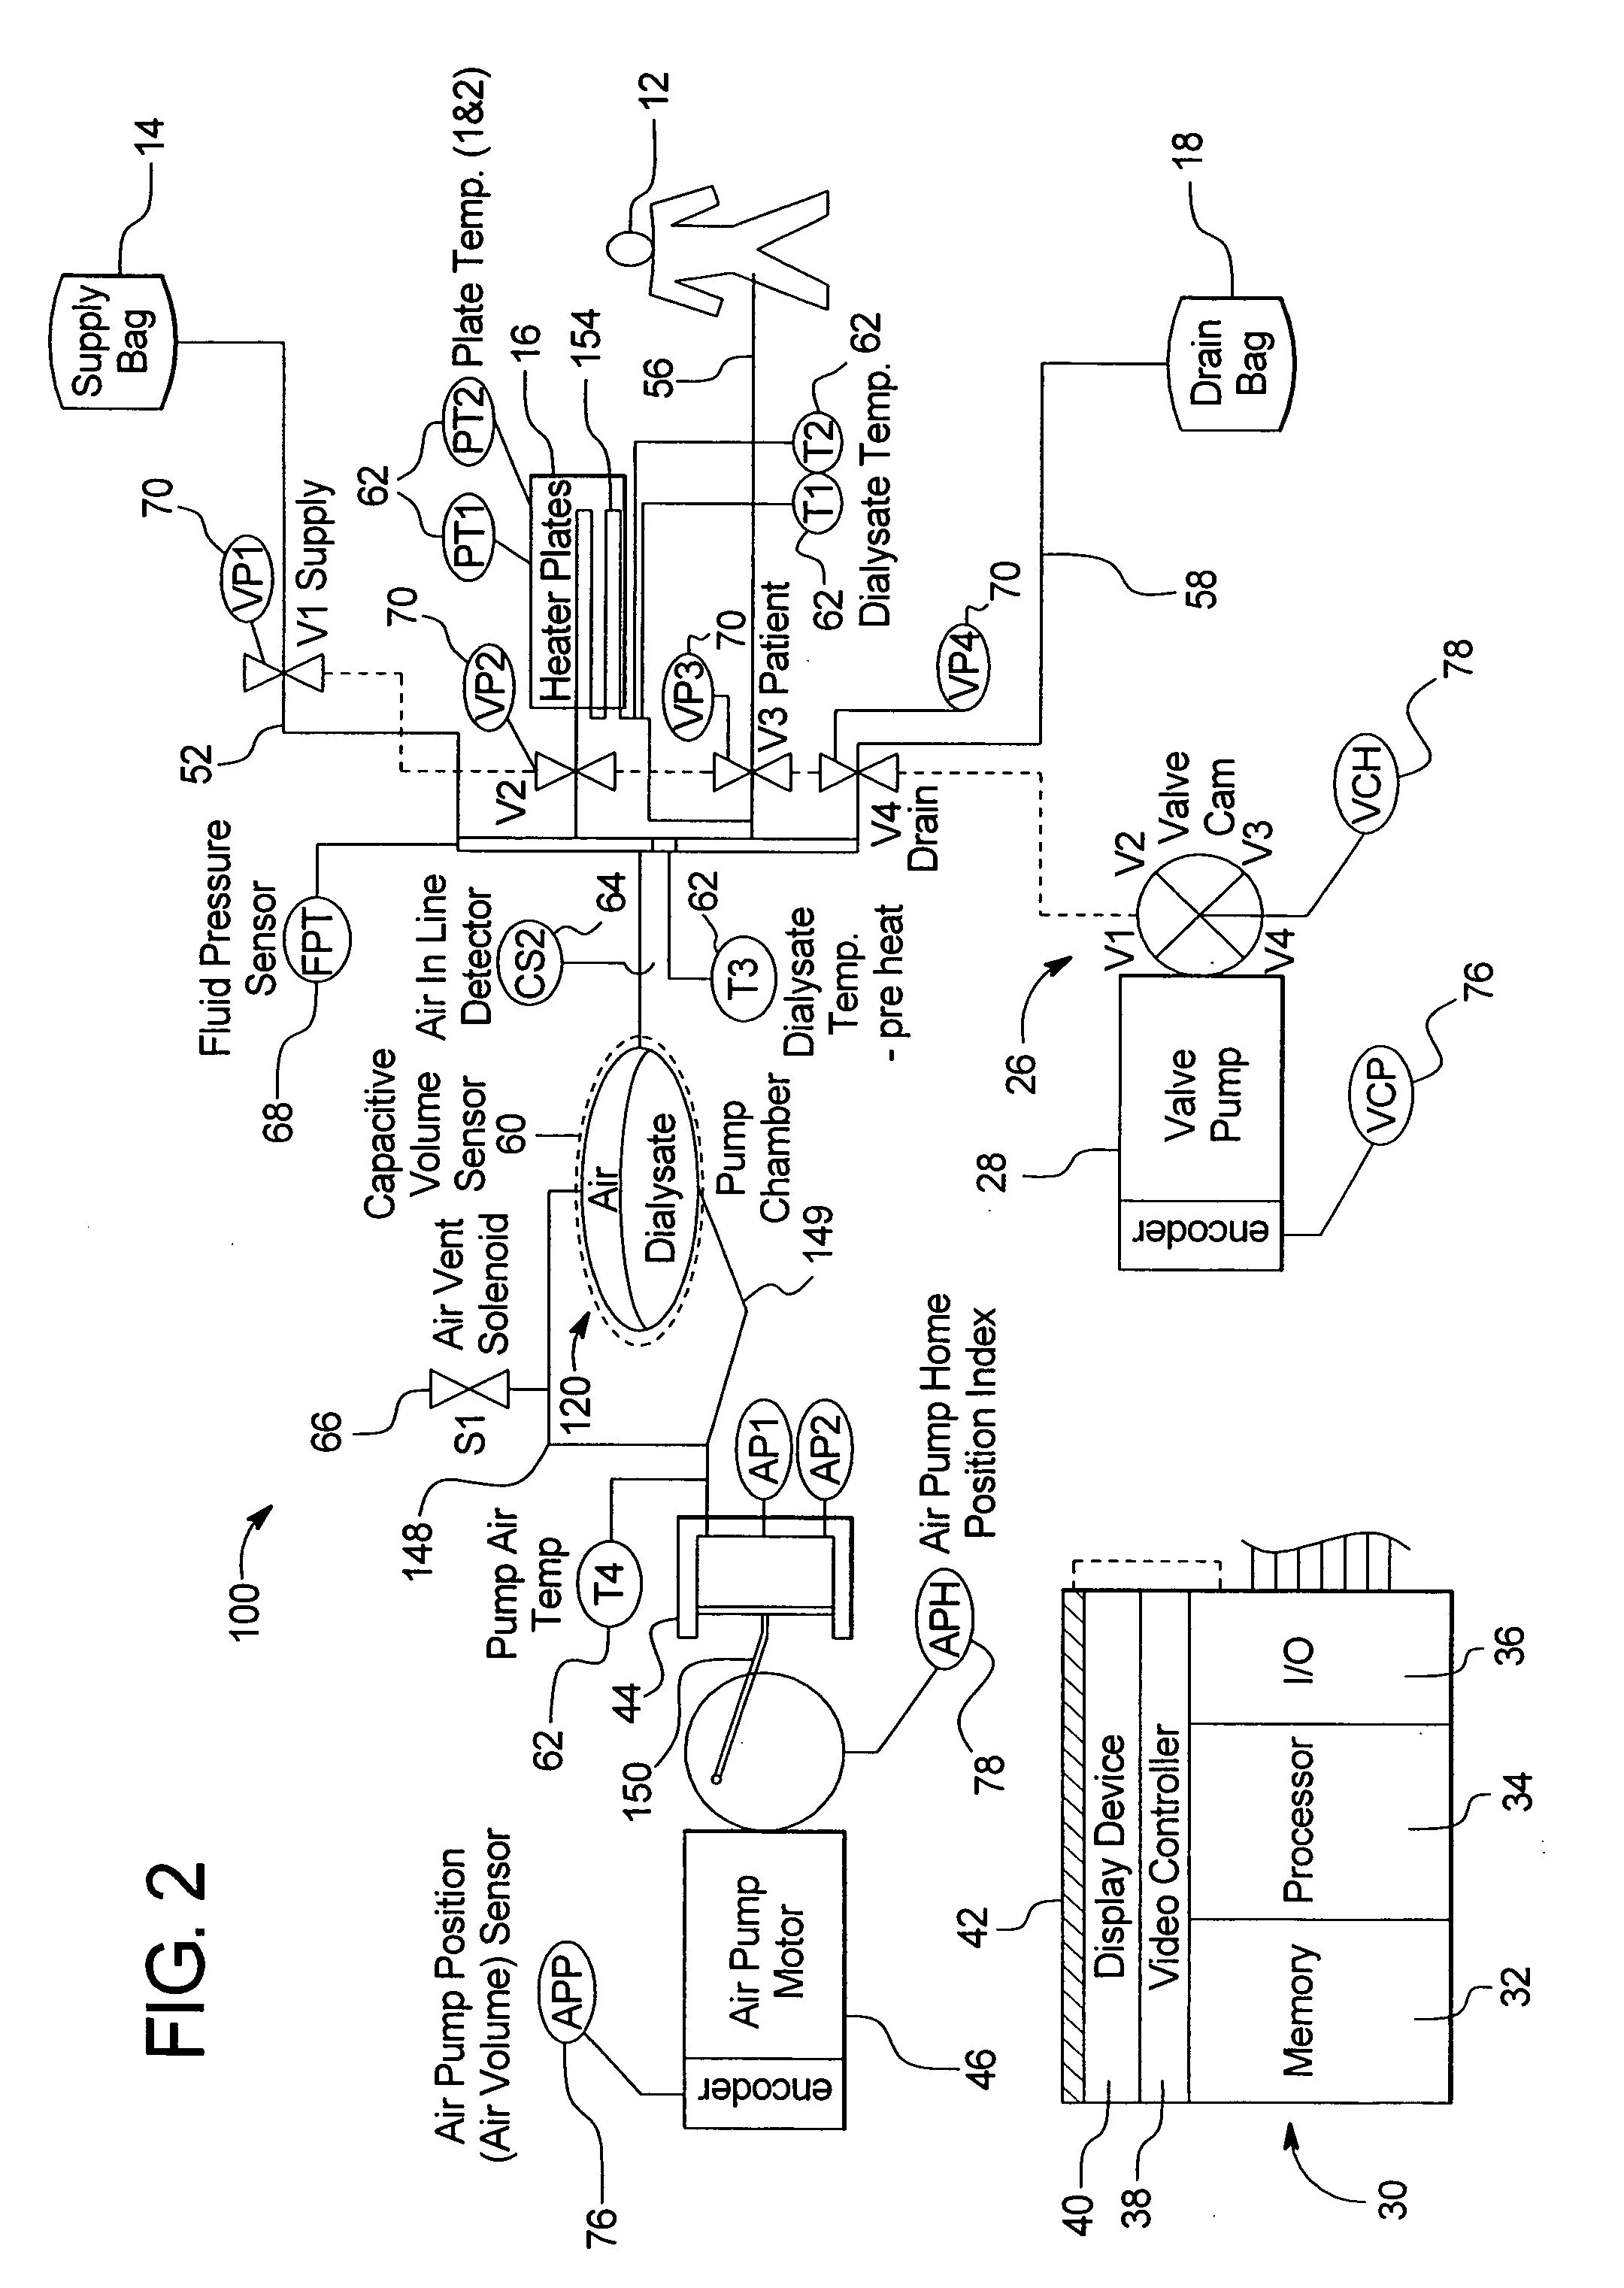 Graphical user interface for automated dialysis system